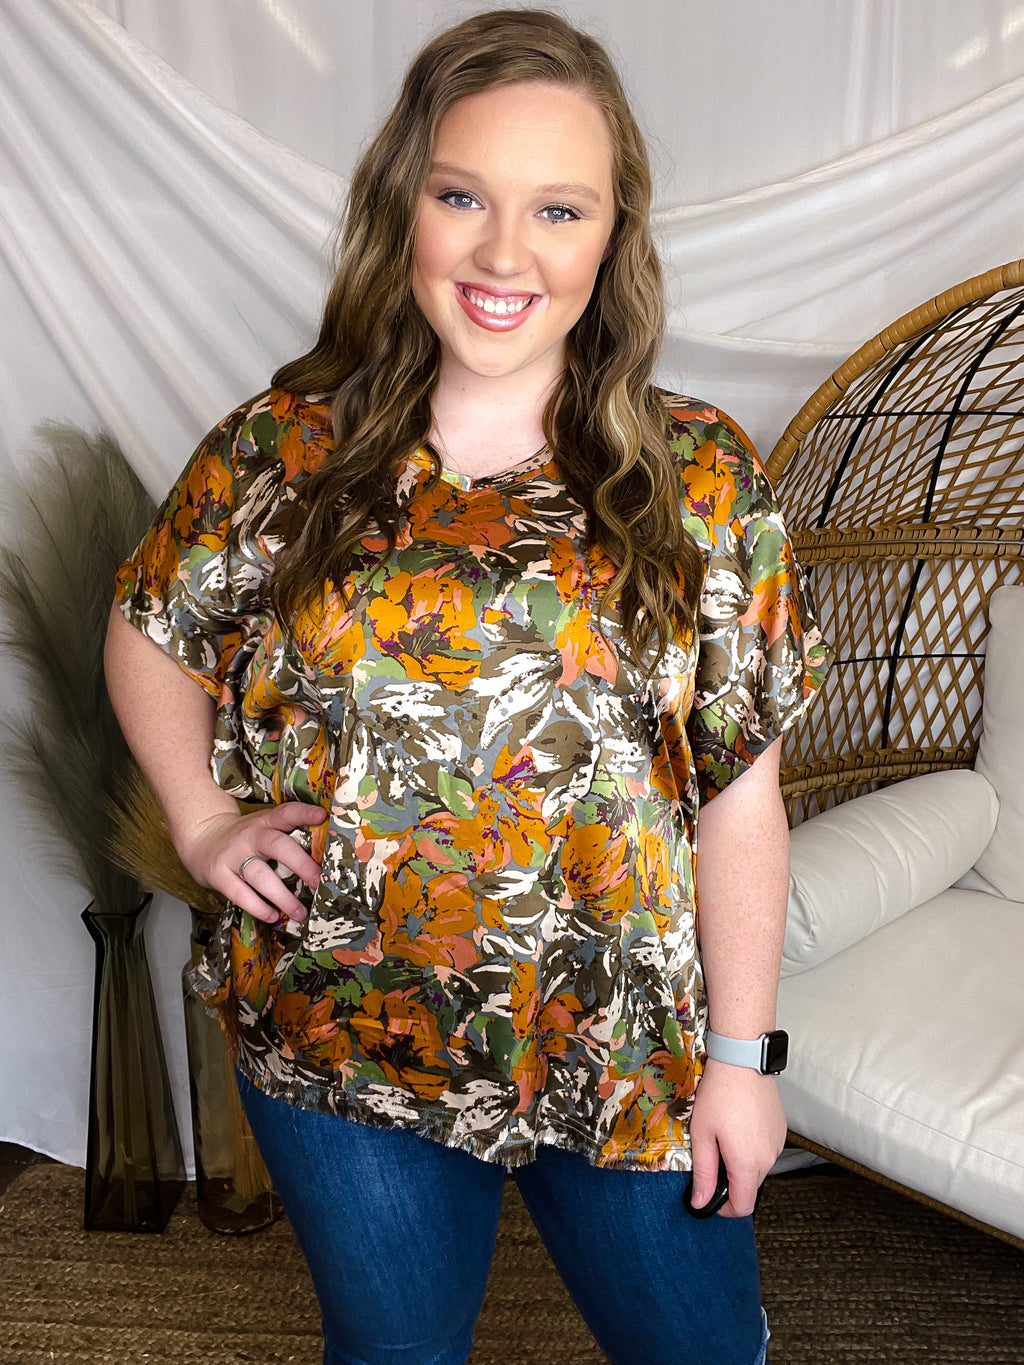 Top features V-neck detail, short cuffed sleeves, pumpkin color print, frayed bottom, and runs true to size!